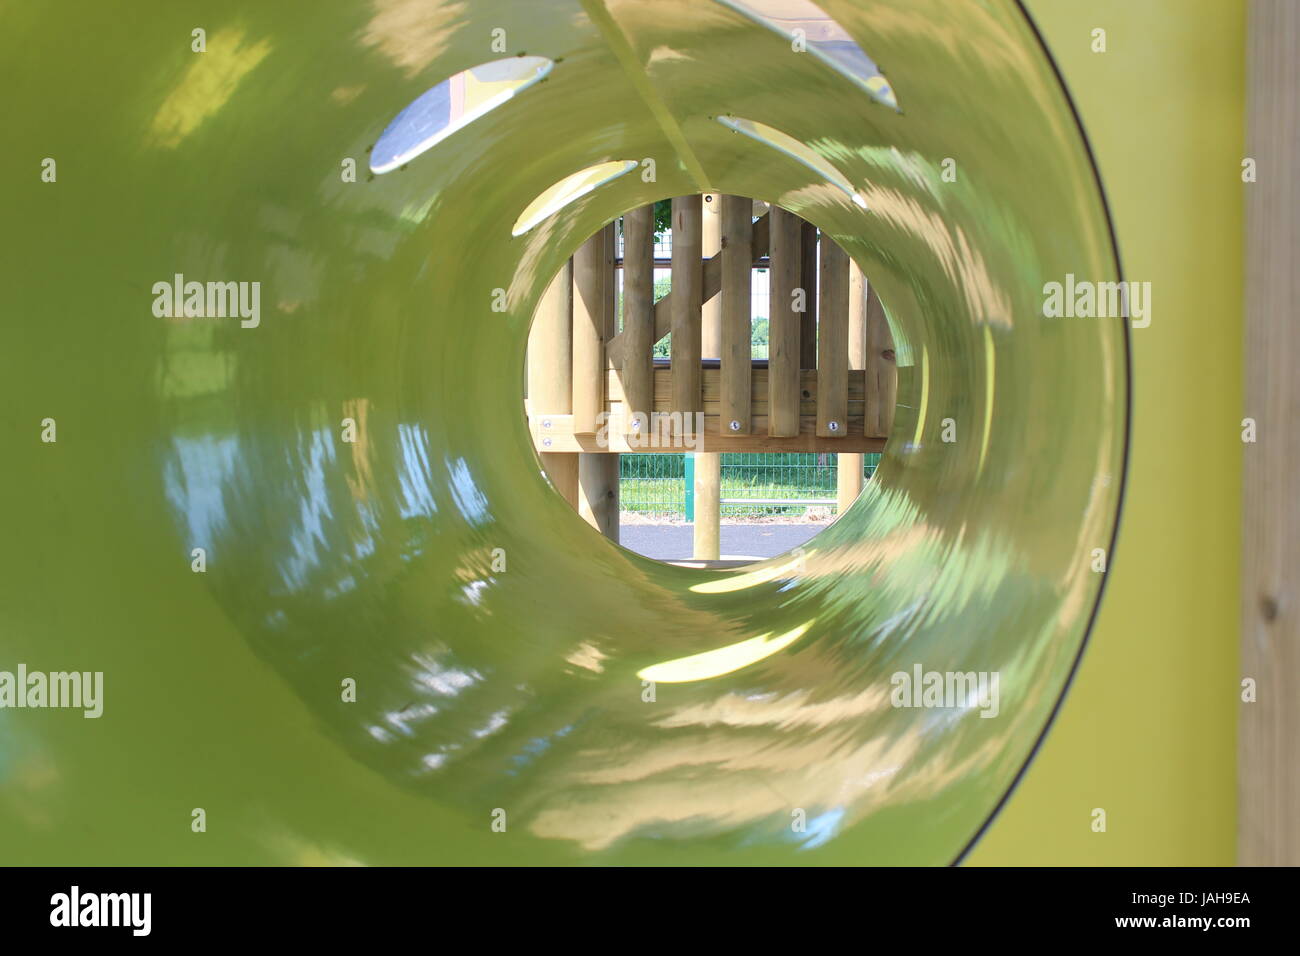 Close Up Of Children S Play Equipment In A Local Park The Inside Of Stock Photo Alamy